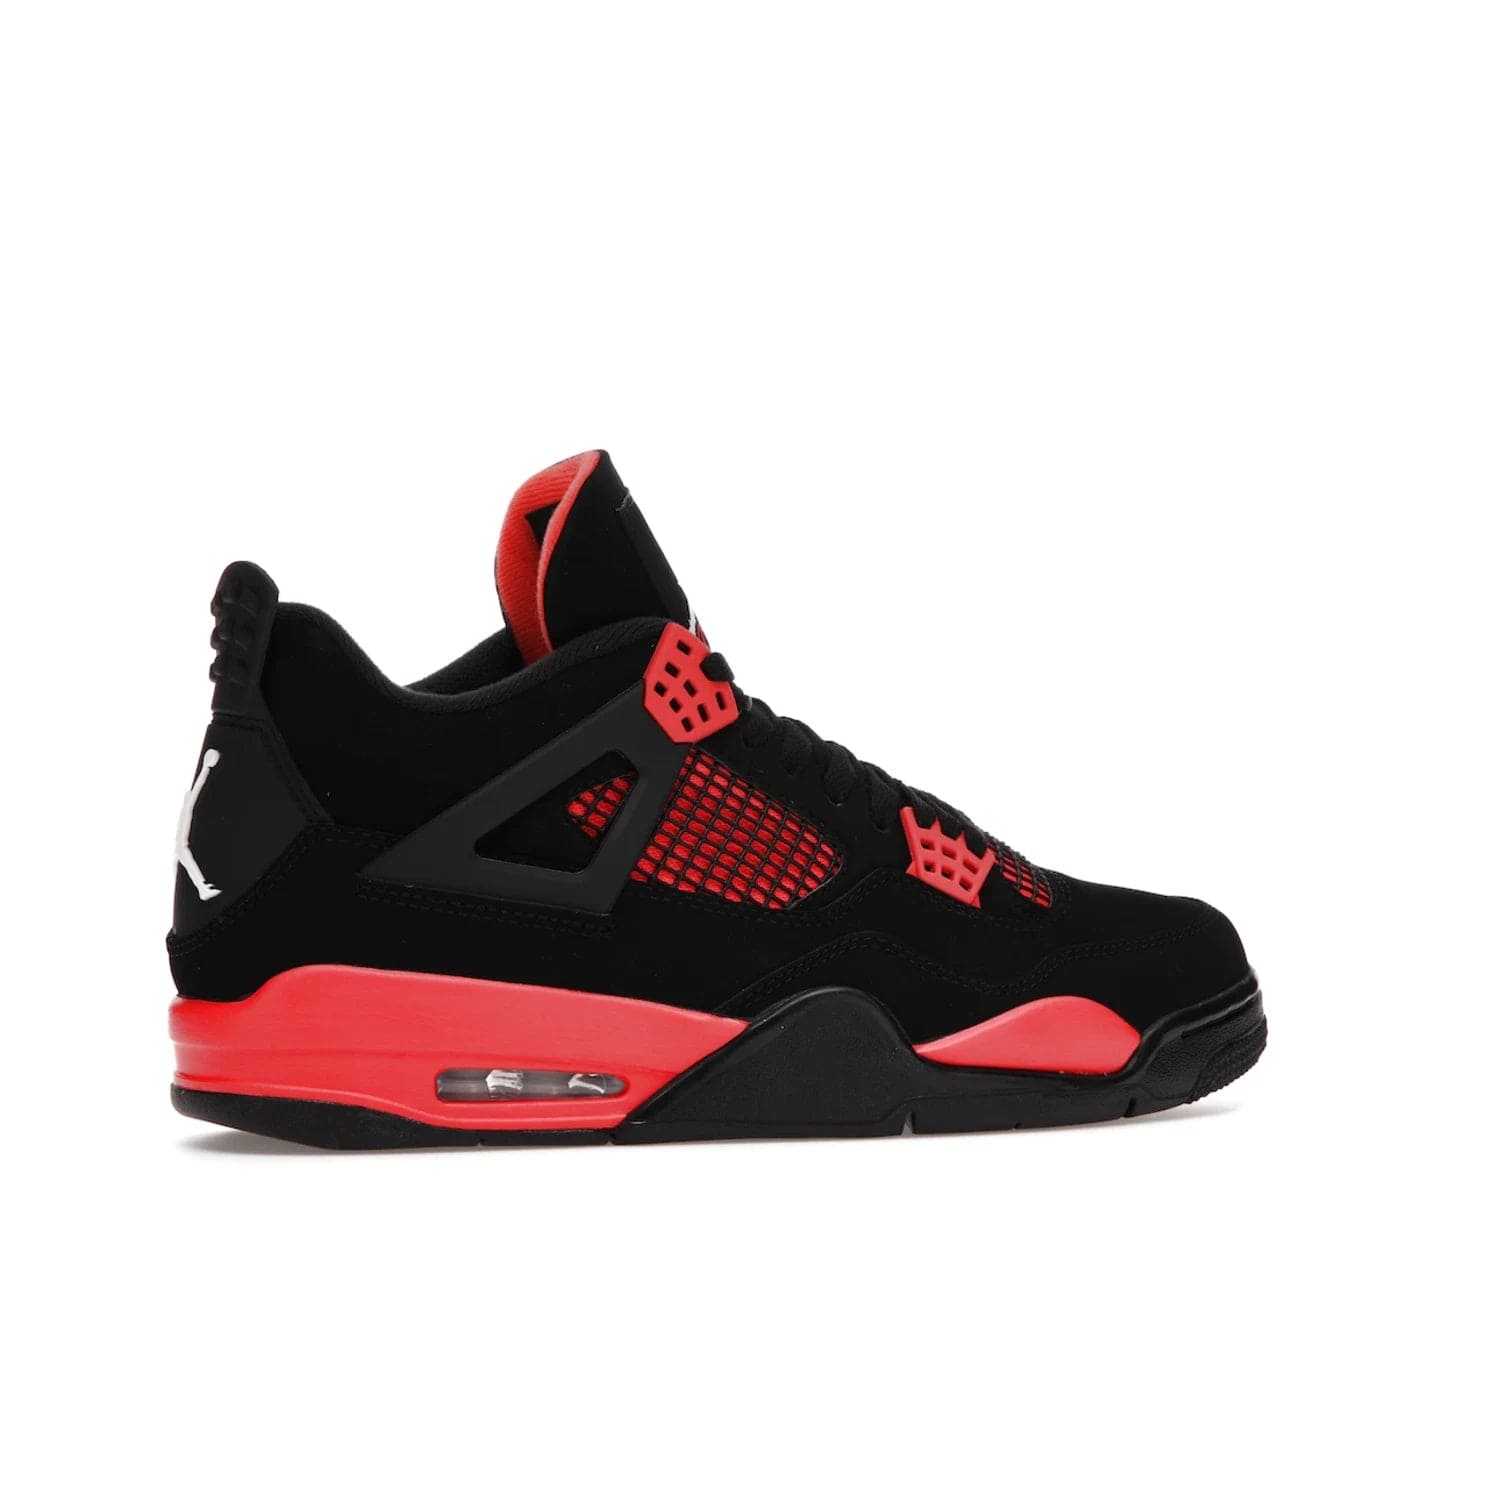 Jordan 4 Retro Red Thunder - Image 35 - Only at www.BallersClubKickz.com - Upscale your footwear with the Air Jordan 4 Retro Red Thunder. Featuring a Durabuck upper, red underlays, signature Flight patch, and vibrant red midsole, this retro sneaker adds style and edge. Releases in January 2022.